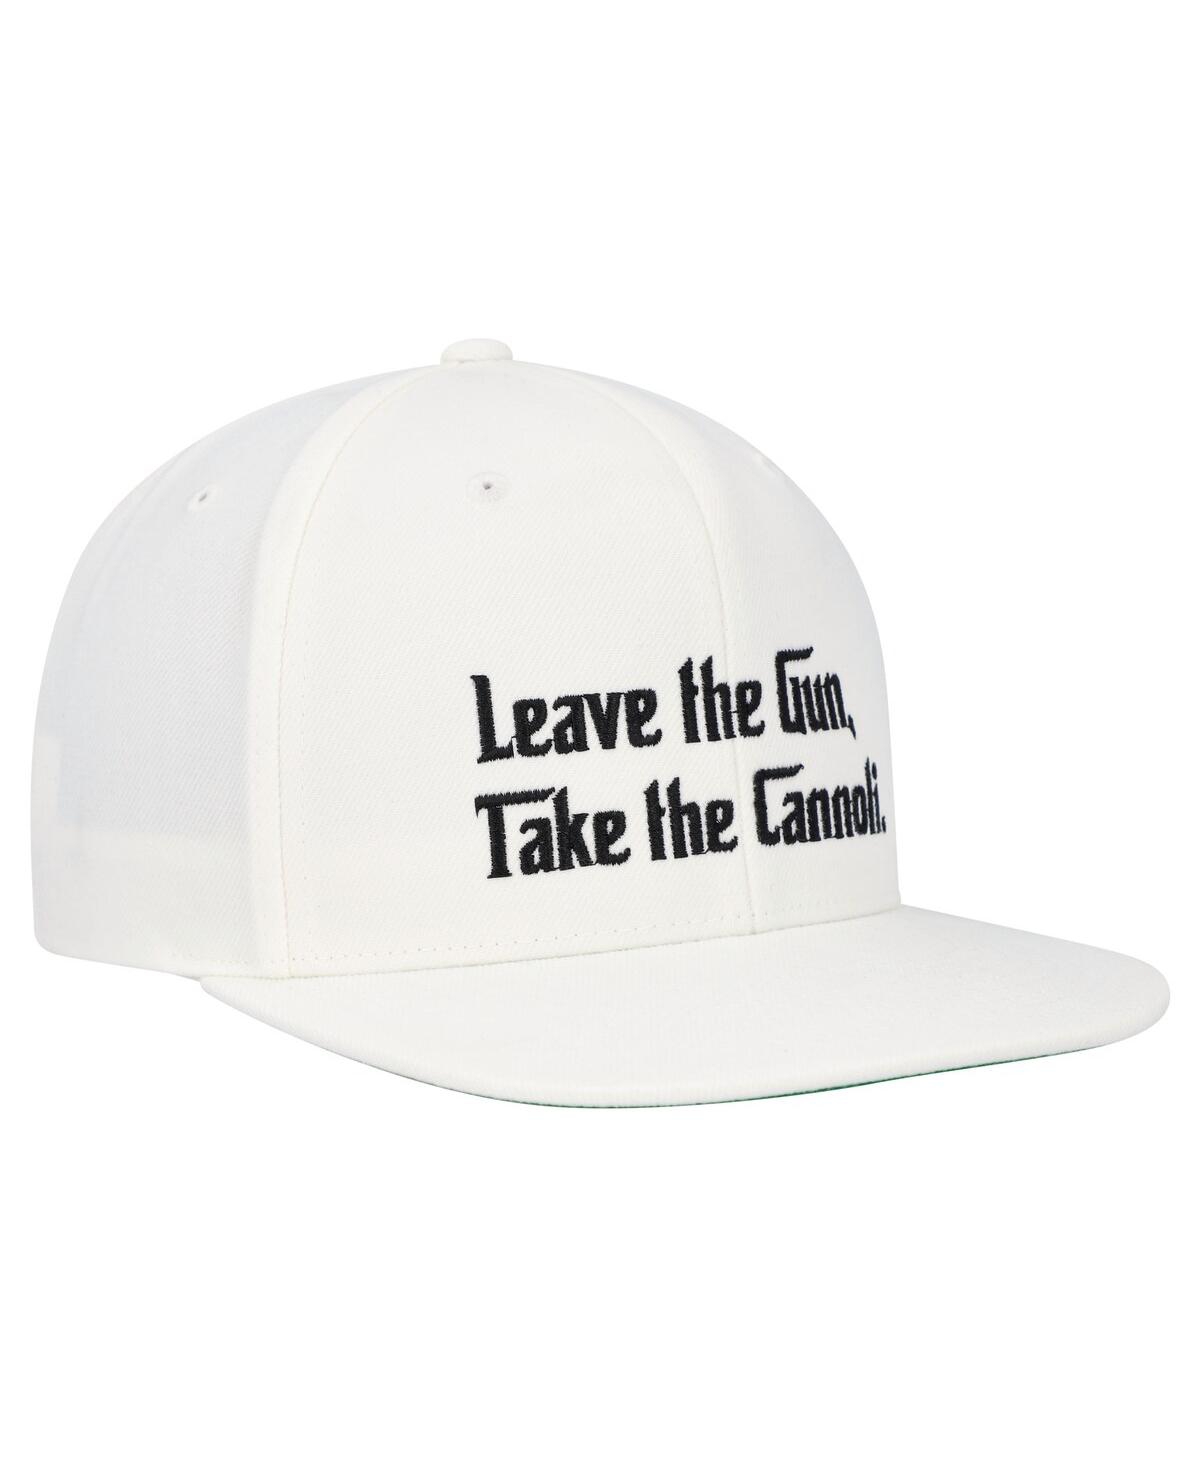 Shop Contenders Clothing Men's And Women's  White The Godfather Leave The Gun, Take The Cannoli Snapback H